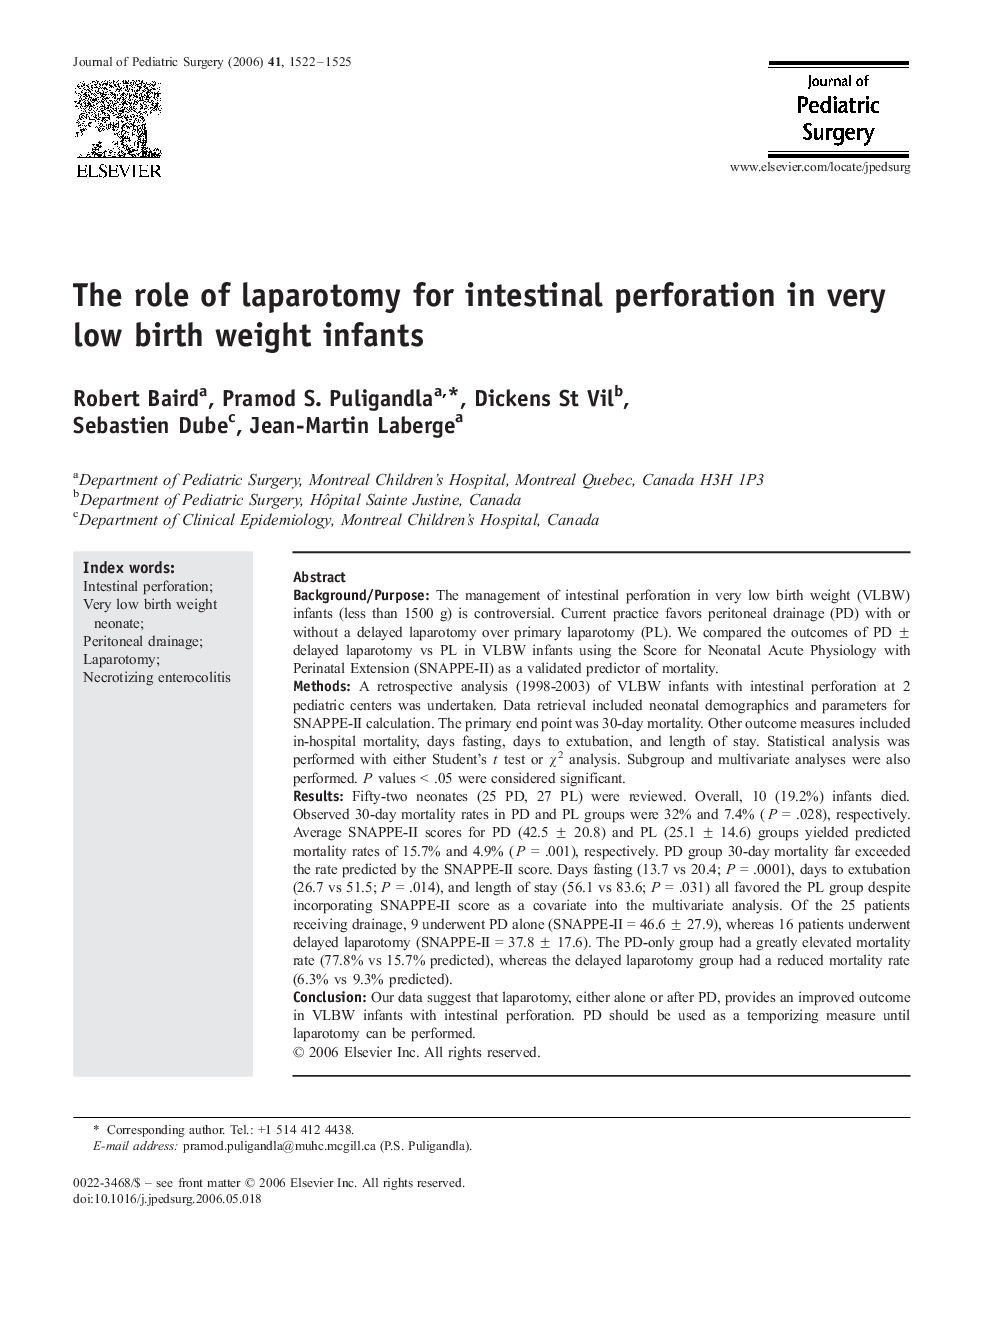 The role of laparotomy for intestinal perforation in very low birth weight infants